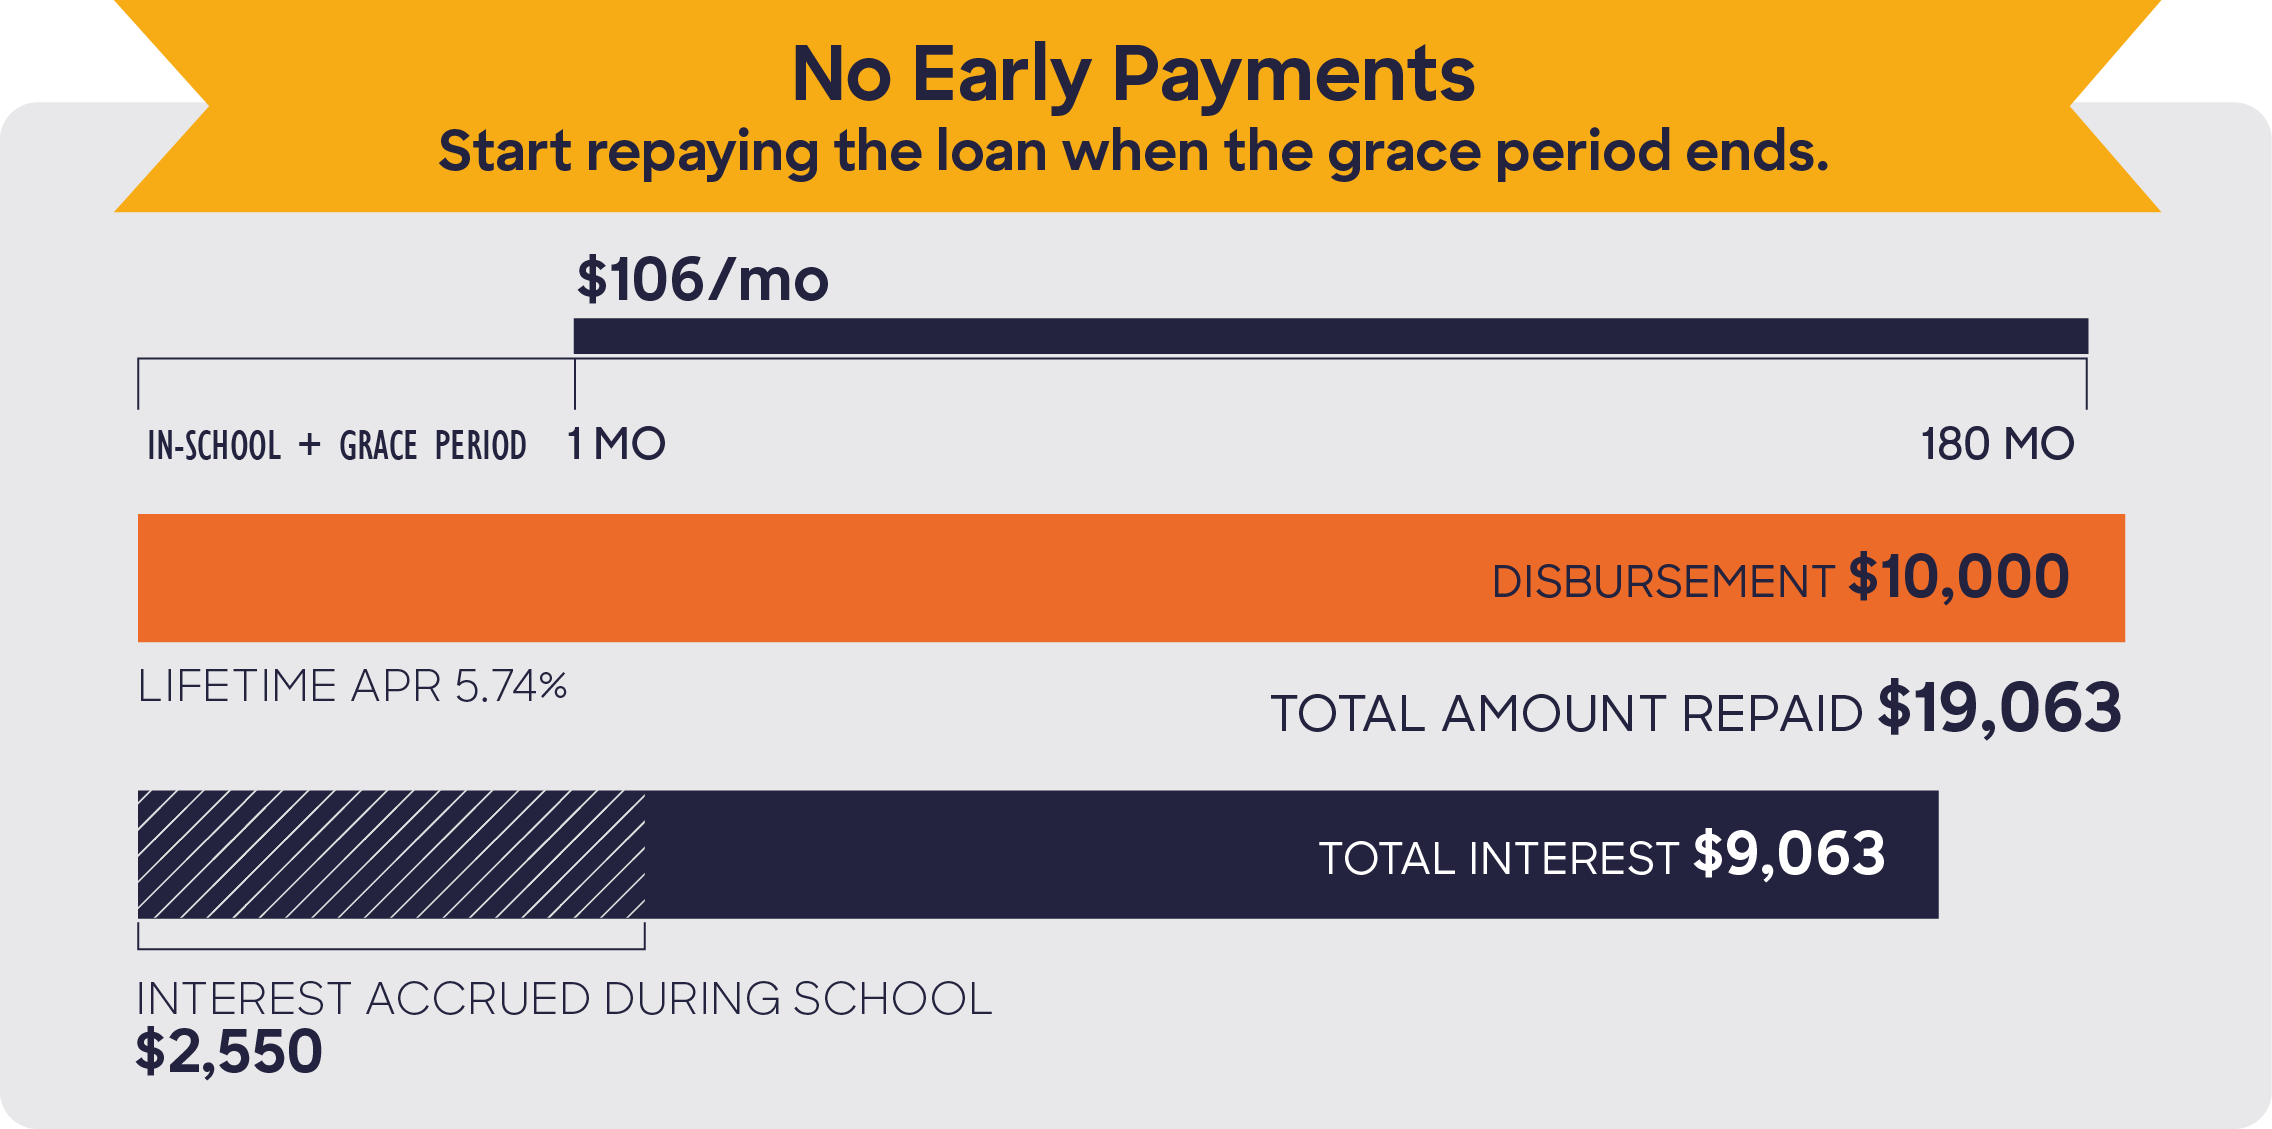 No Early Payments Chart